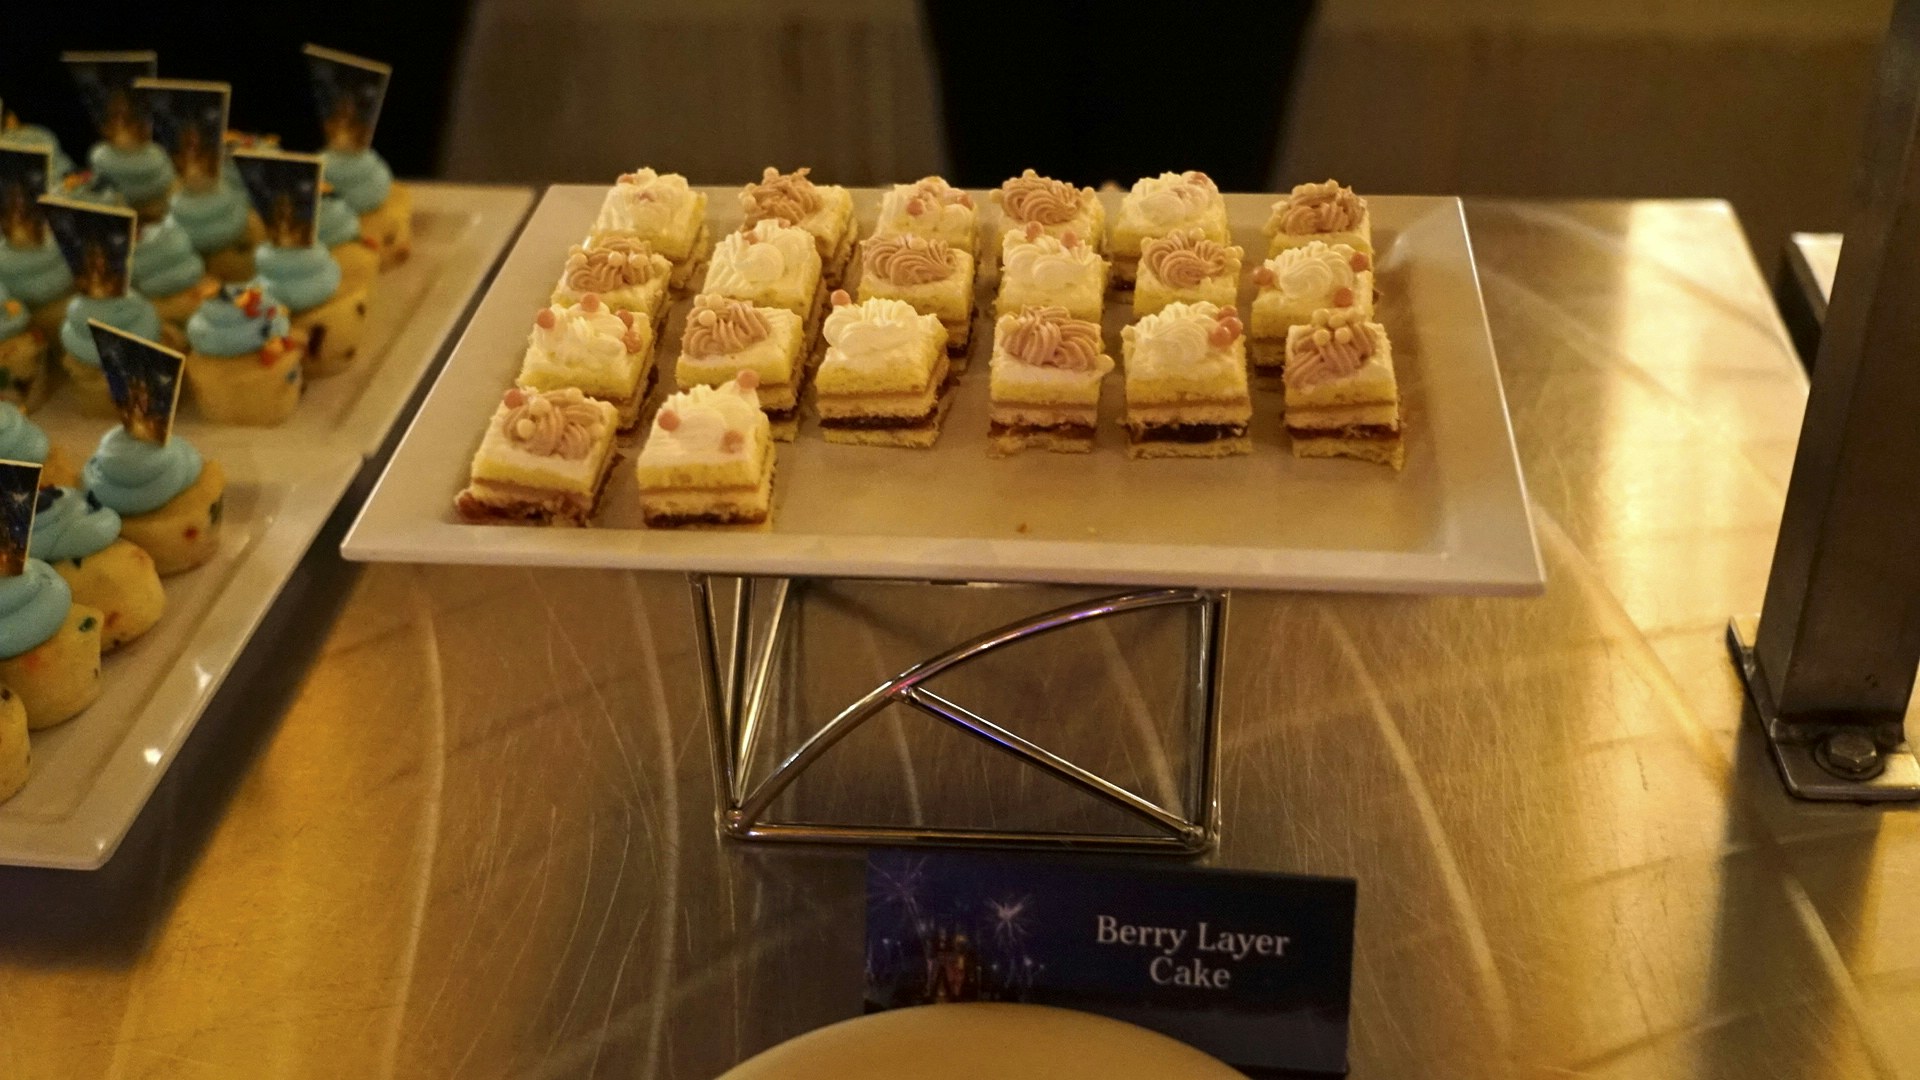 OxsZkGgI tomorrowland terrace dessert party with alcohol happily ever after magic kingdom feb 2020 19.JPG?auto=compress%2Cformat&ixlib=php 1.2